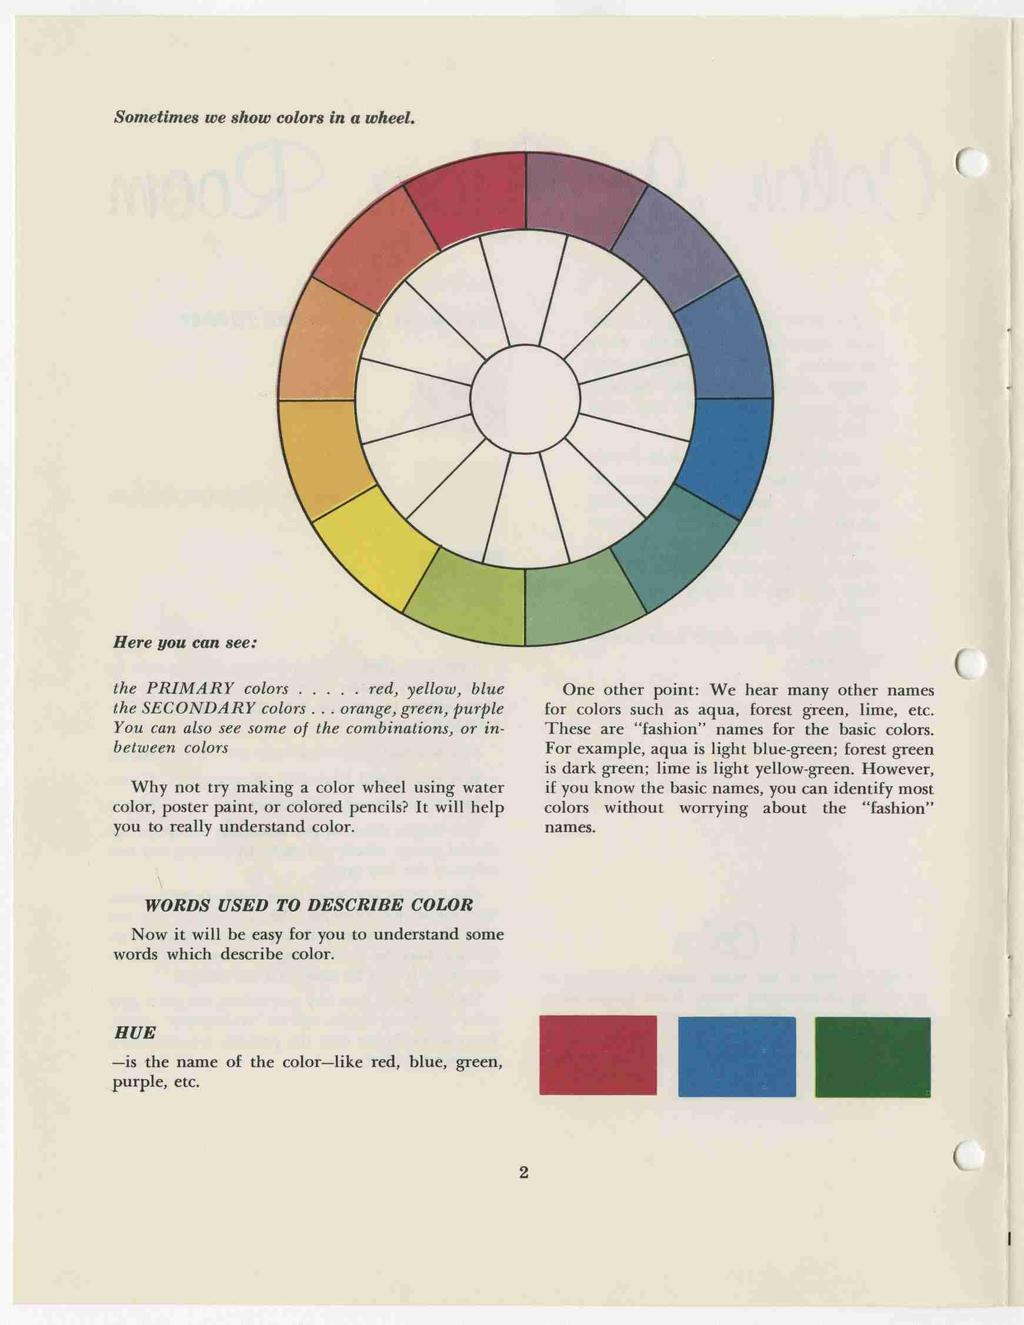 Sometimes we show colors in a wheel. Here you can see: the PRIMARY colors... red, yellow, blue the SECONDARY colors.